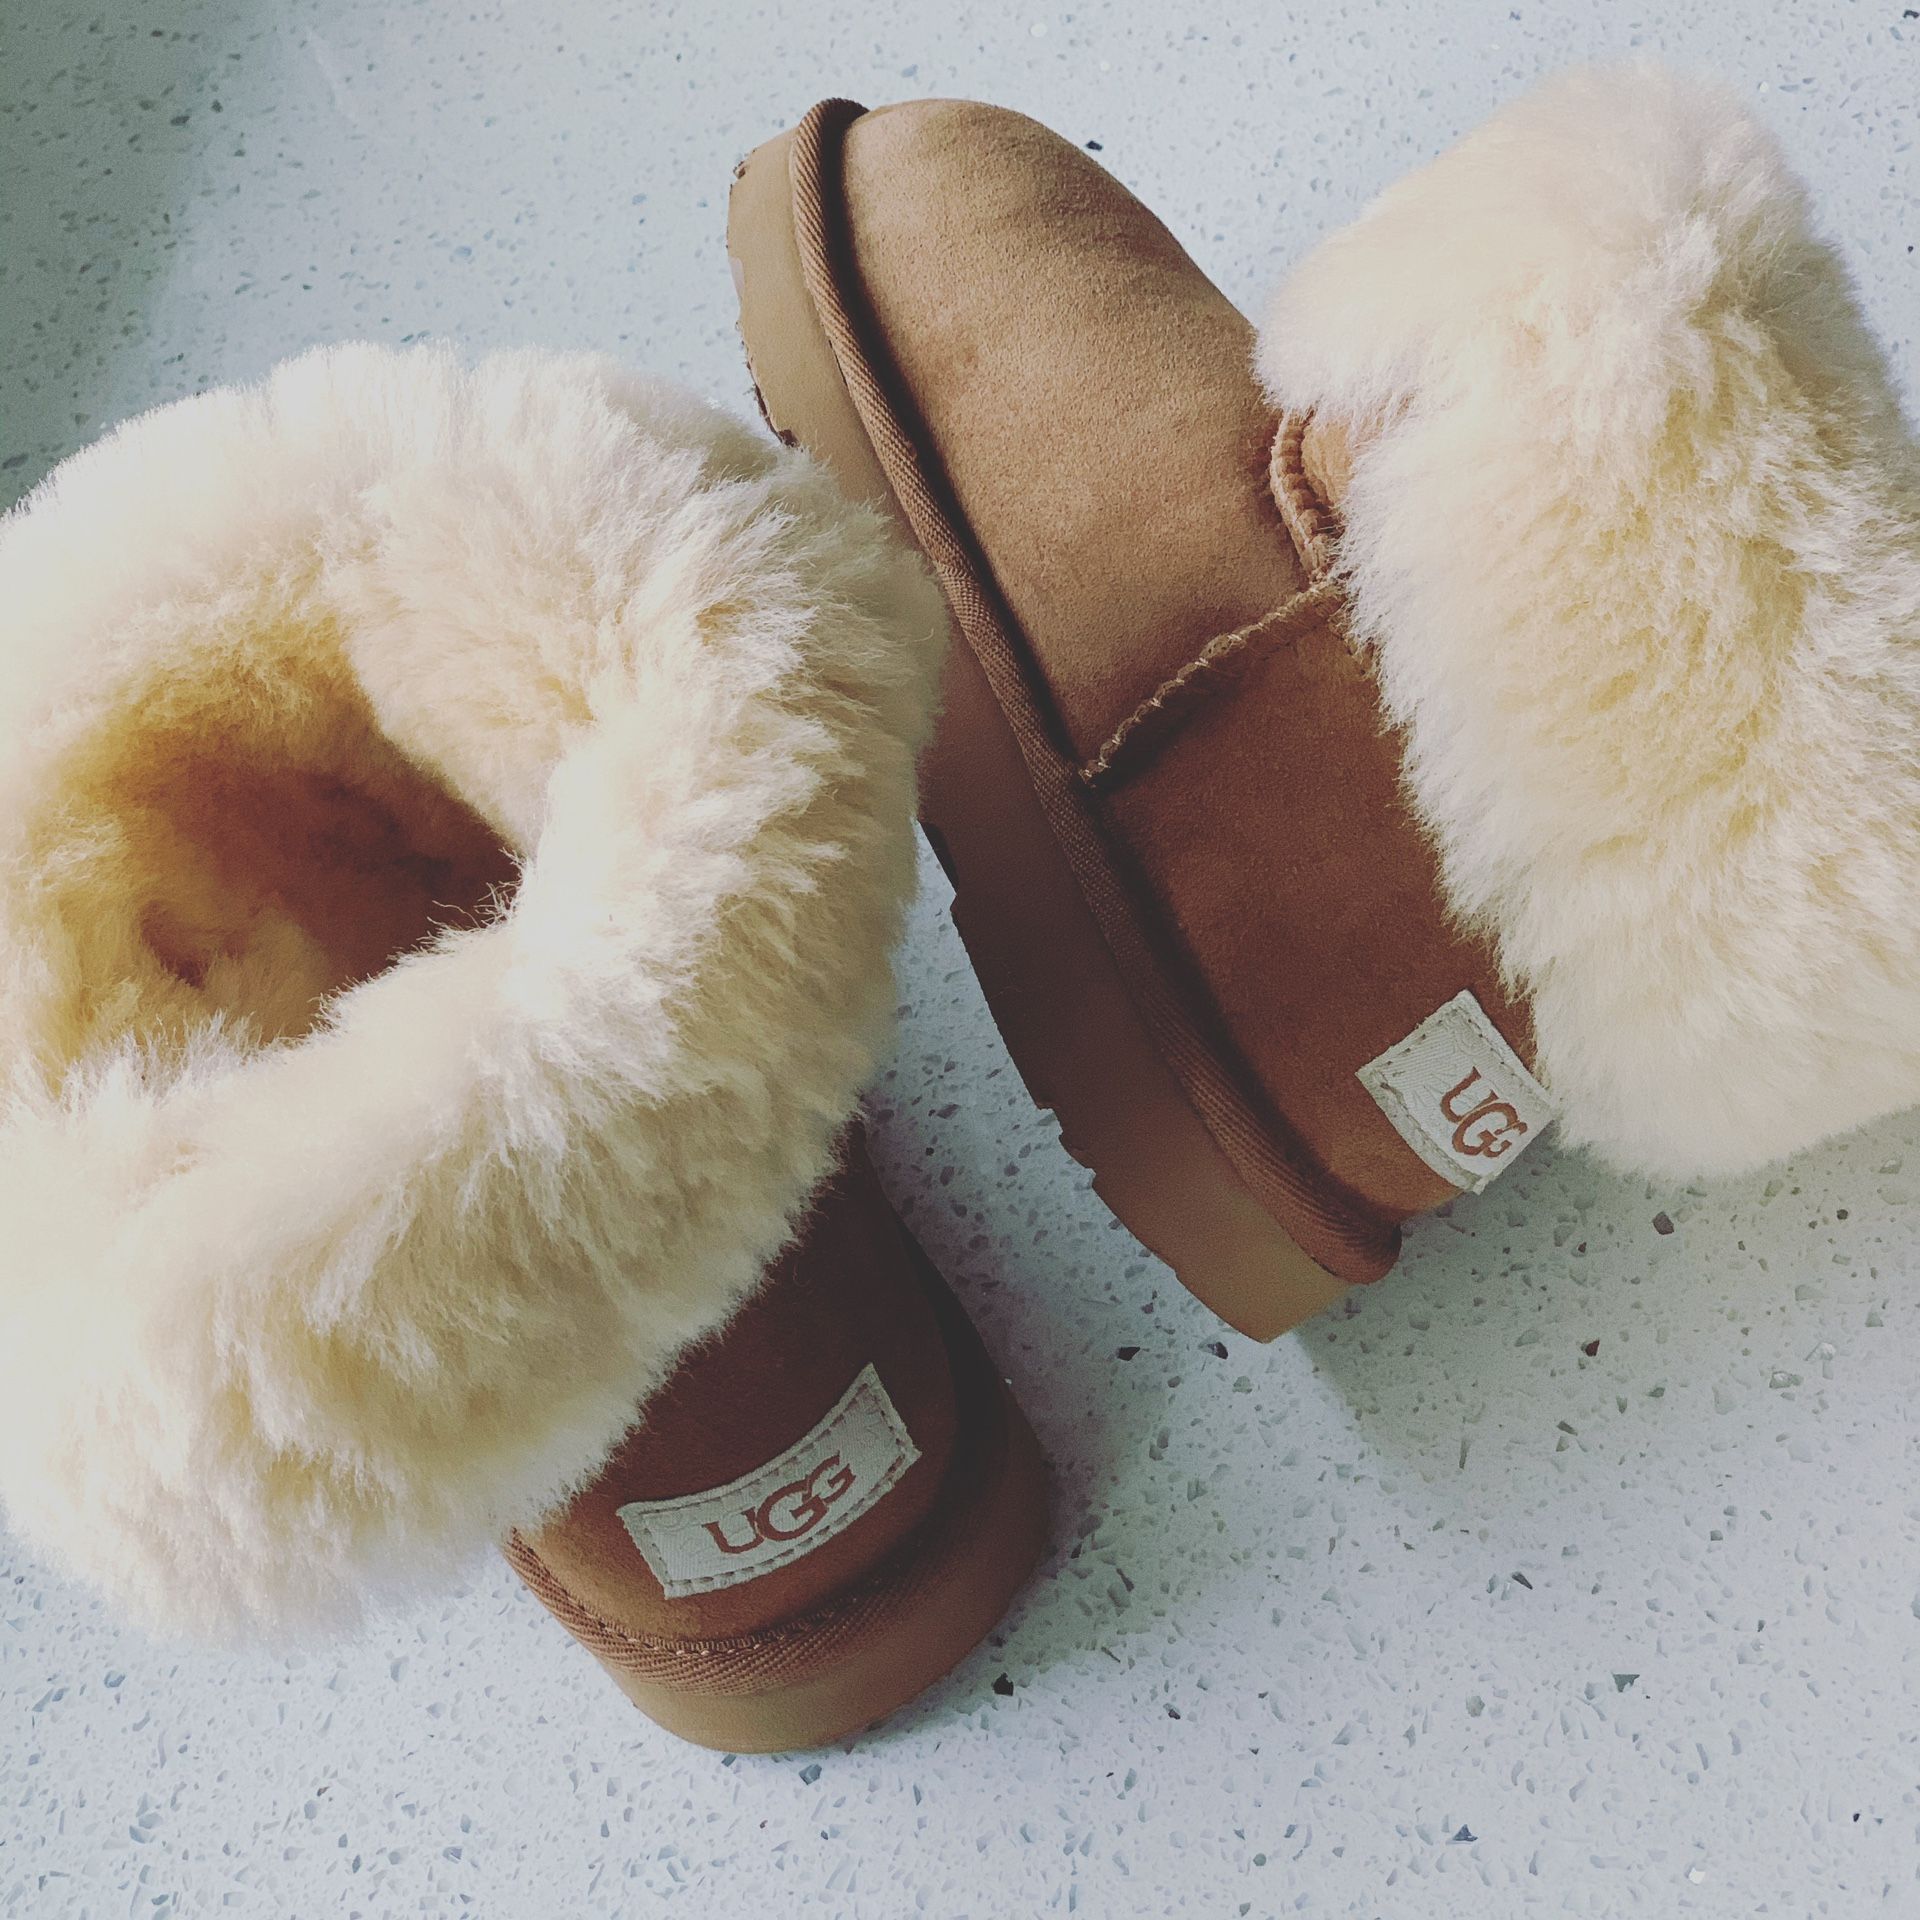 Like New Kids Girls Size 1 UGG Winter Boots in Chestnut